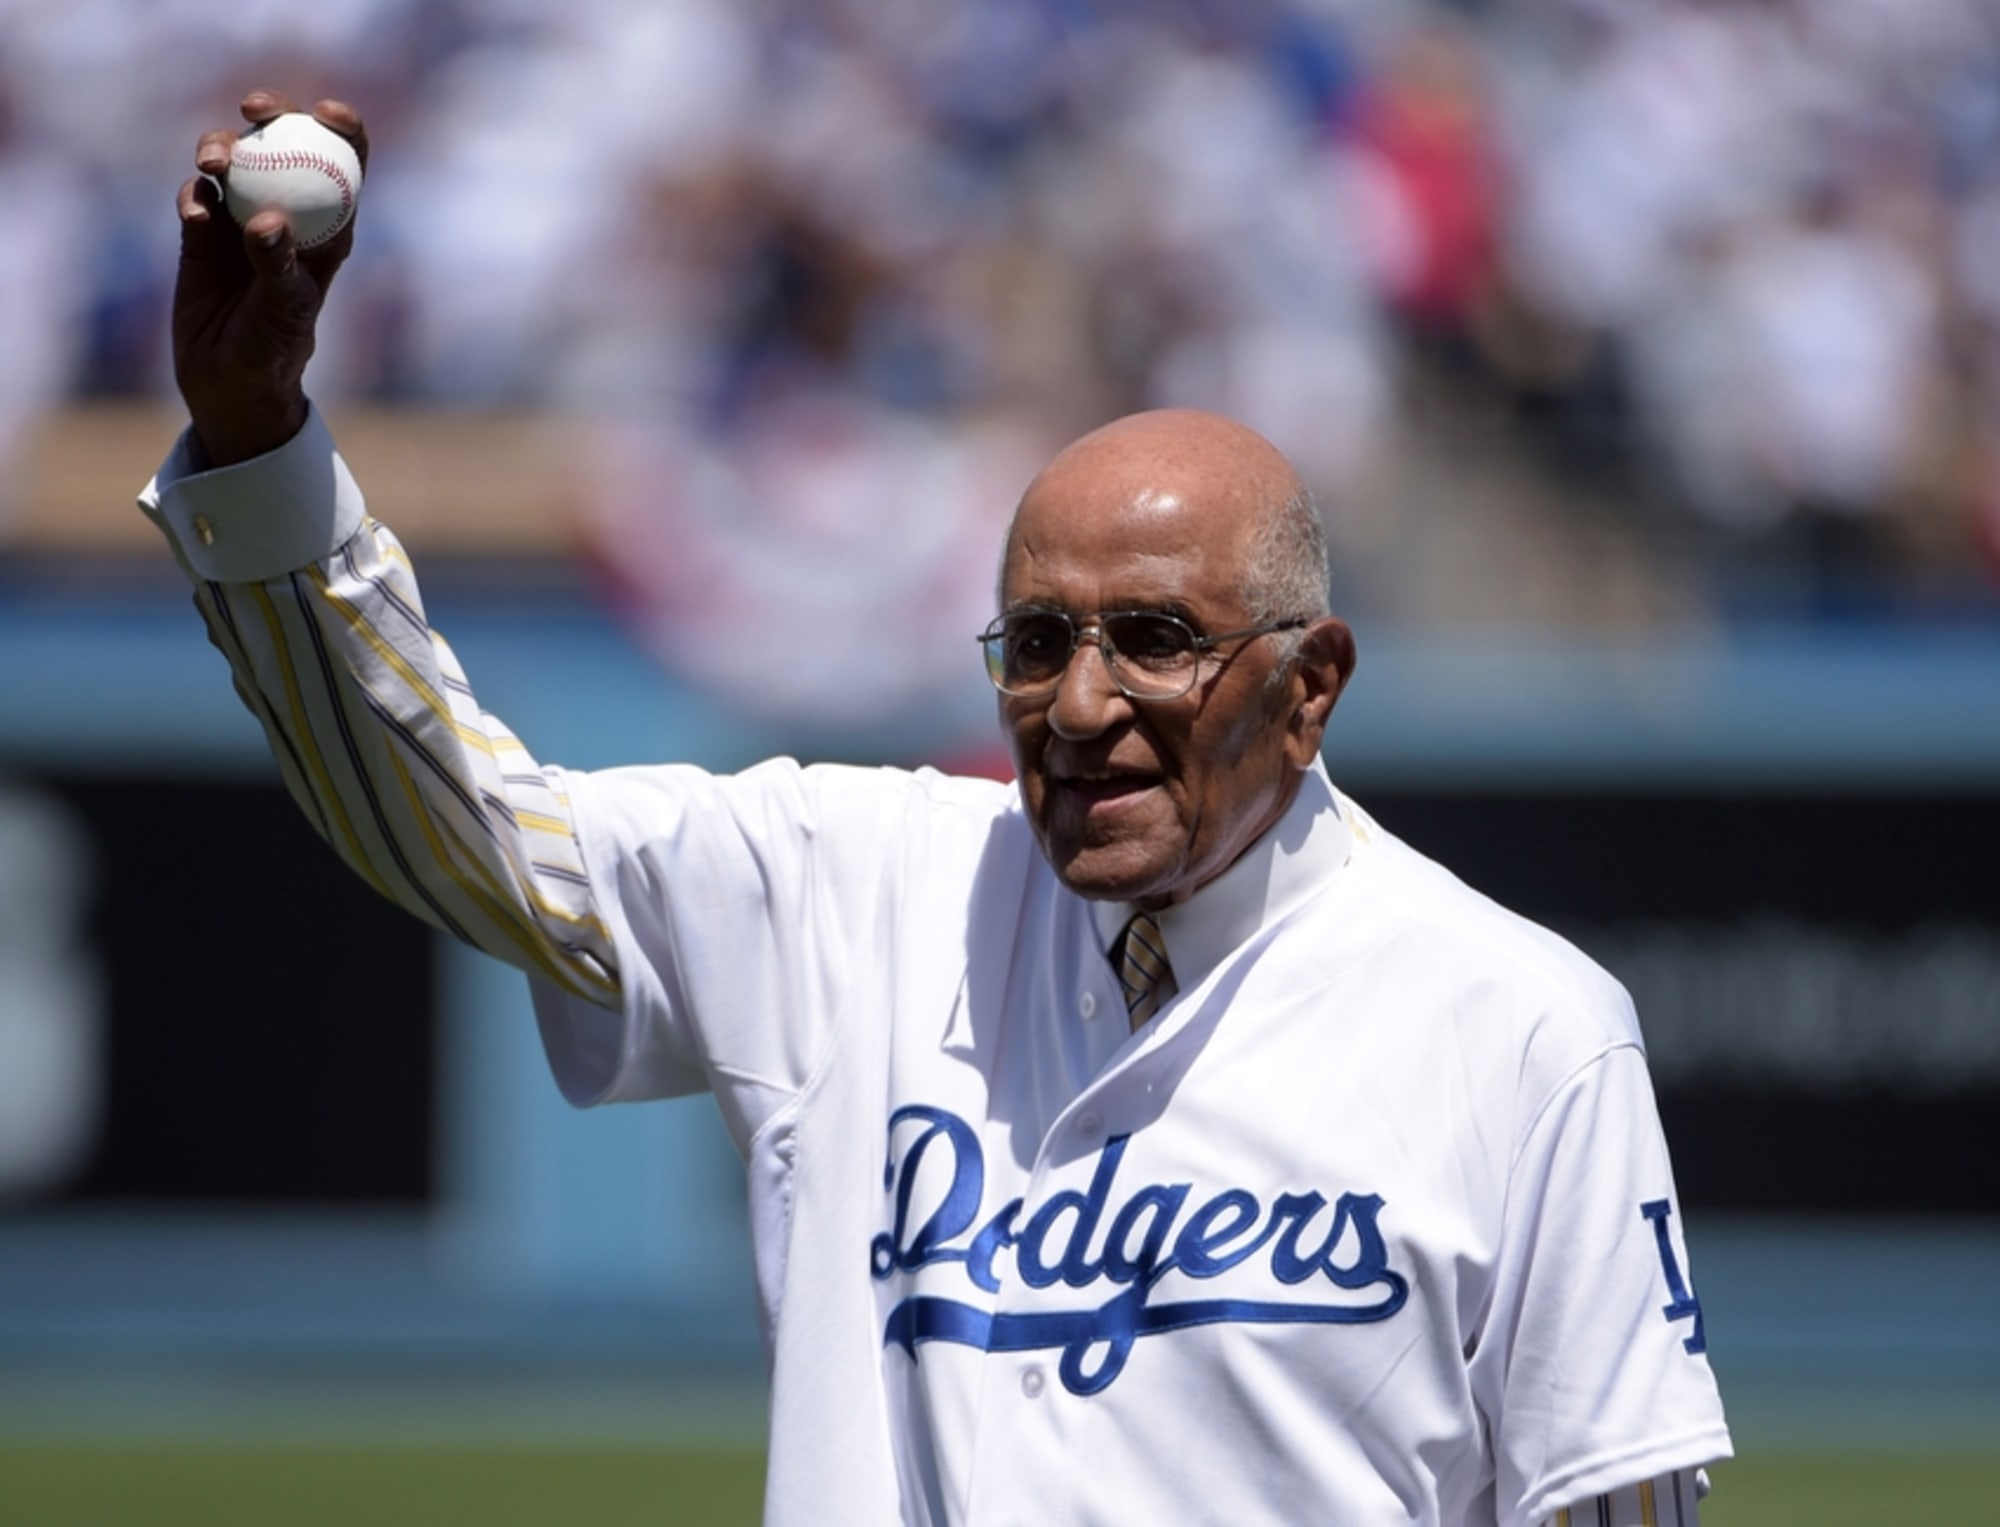 Don Newcombe was the original Cy Young winner